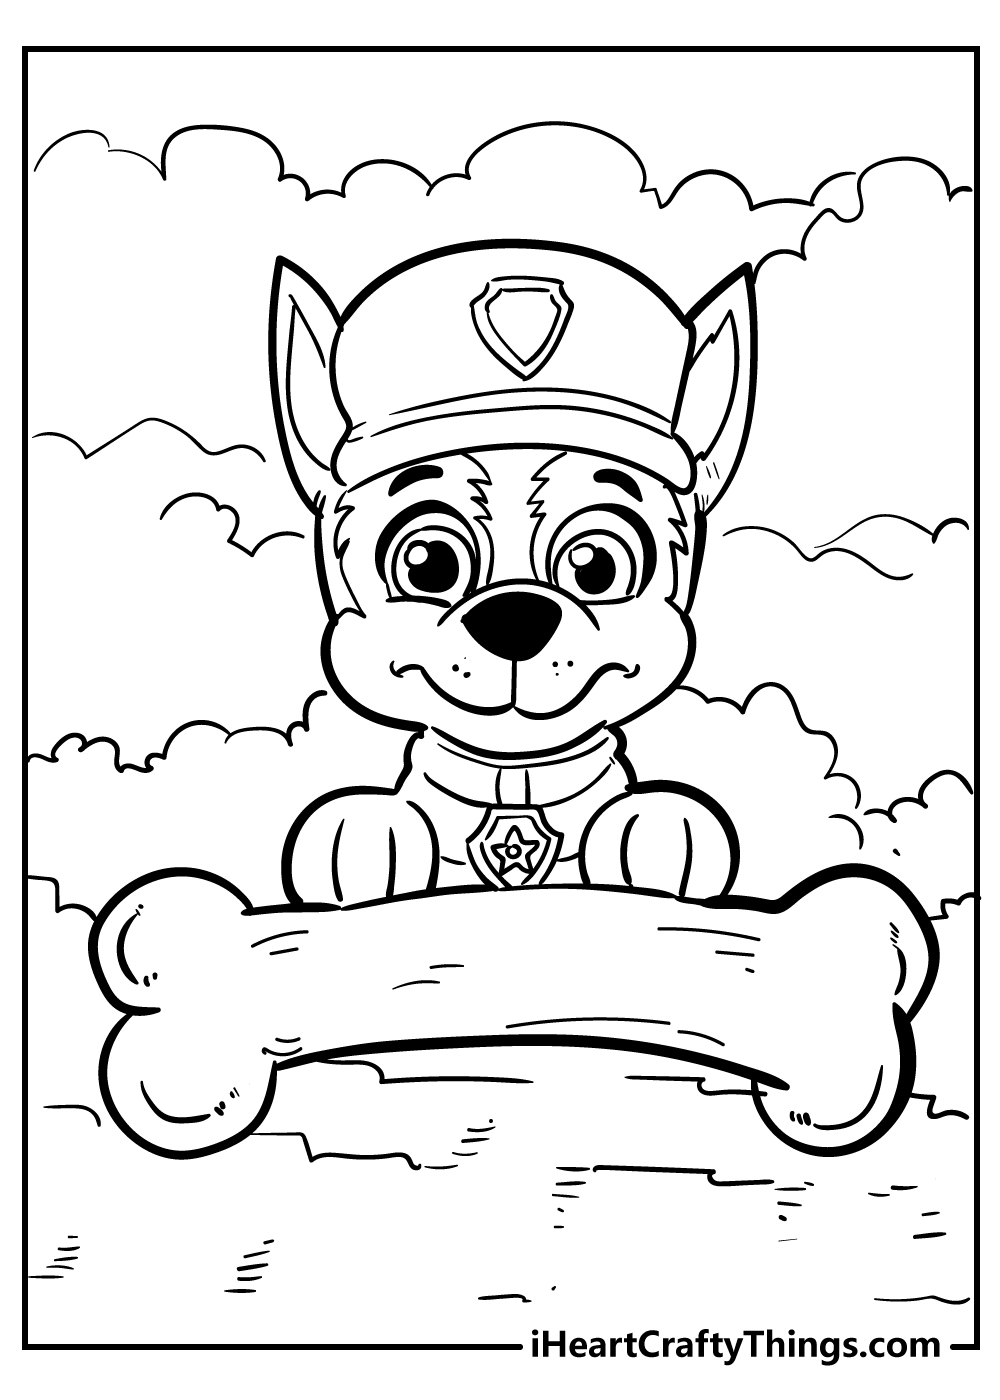 Paw Patrol Coloring Pages FREE Printable 153